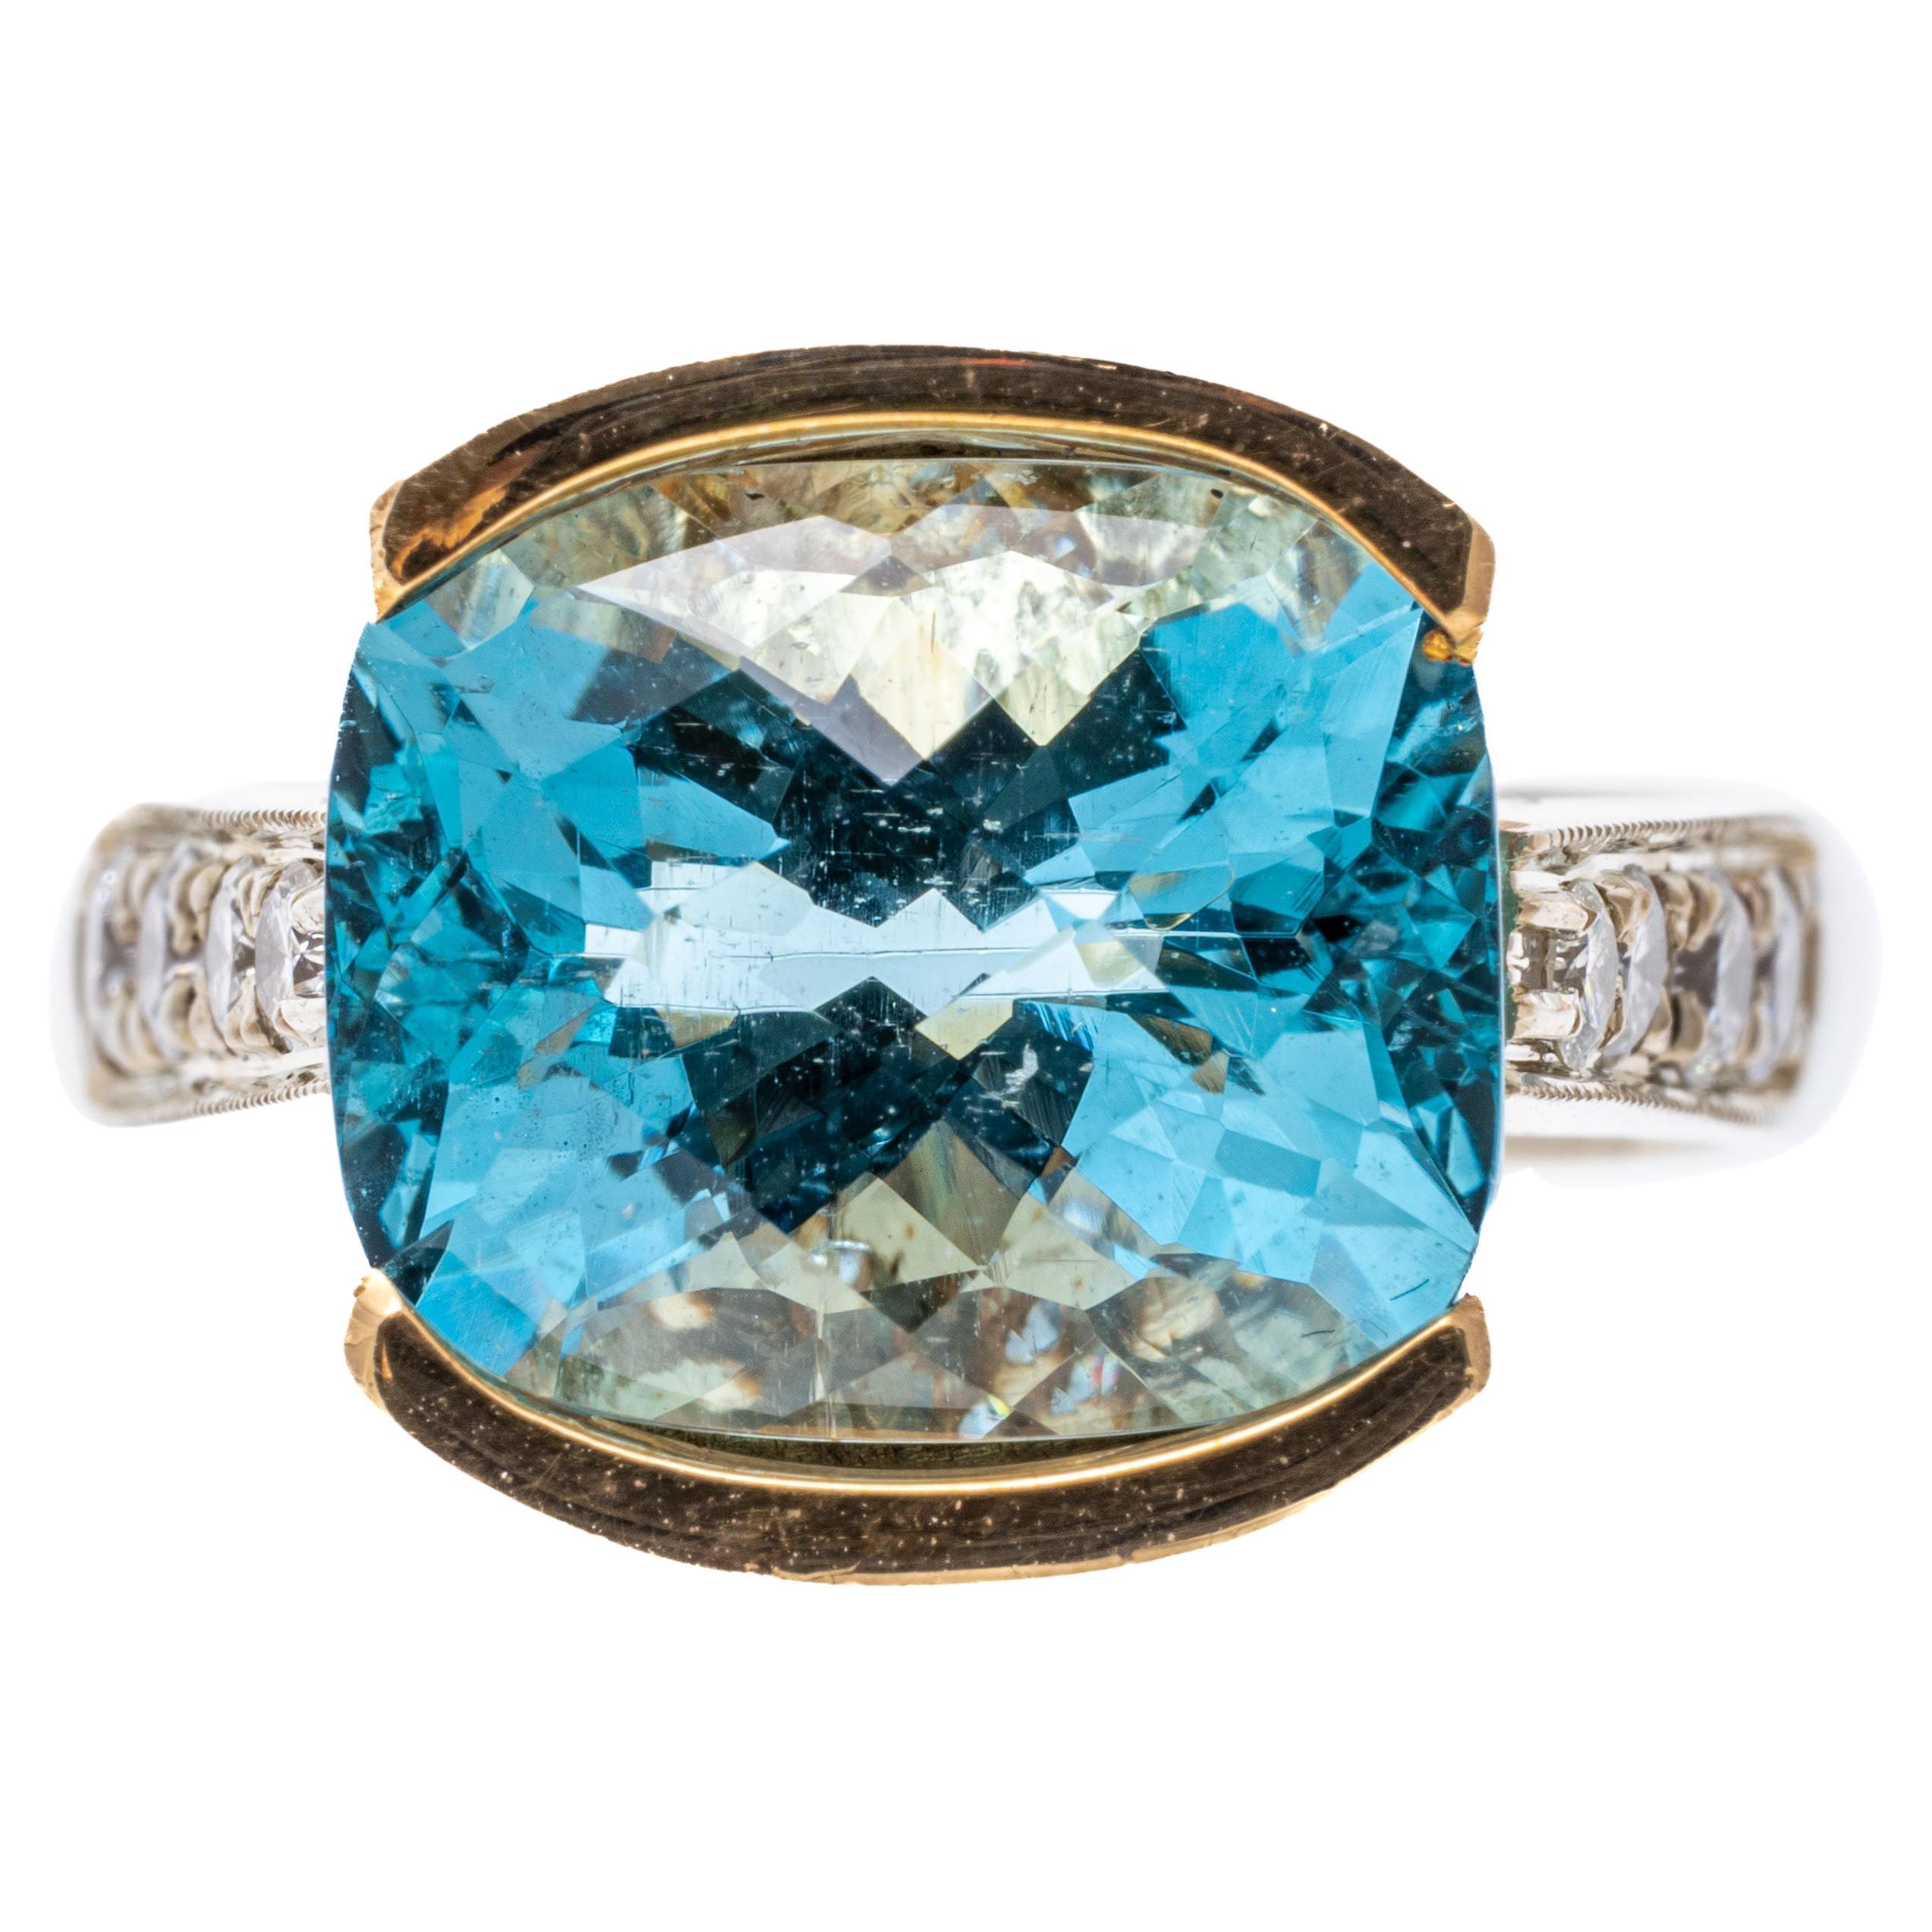 12k Rose and White Gold Aquamarine and Diamond Squared off Ring